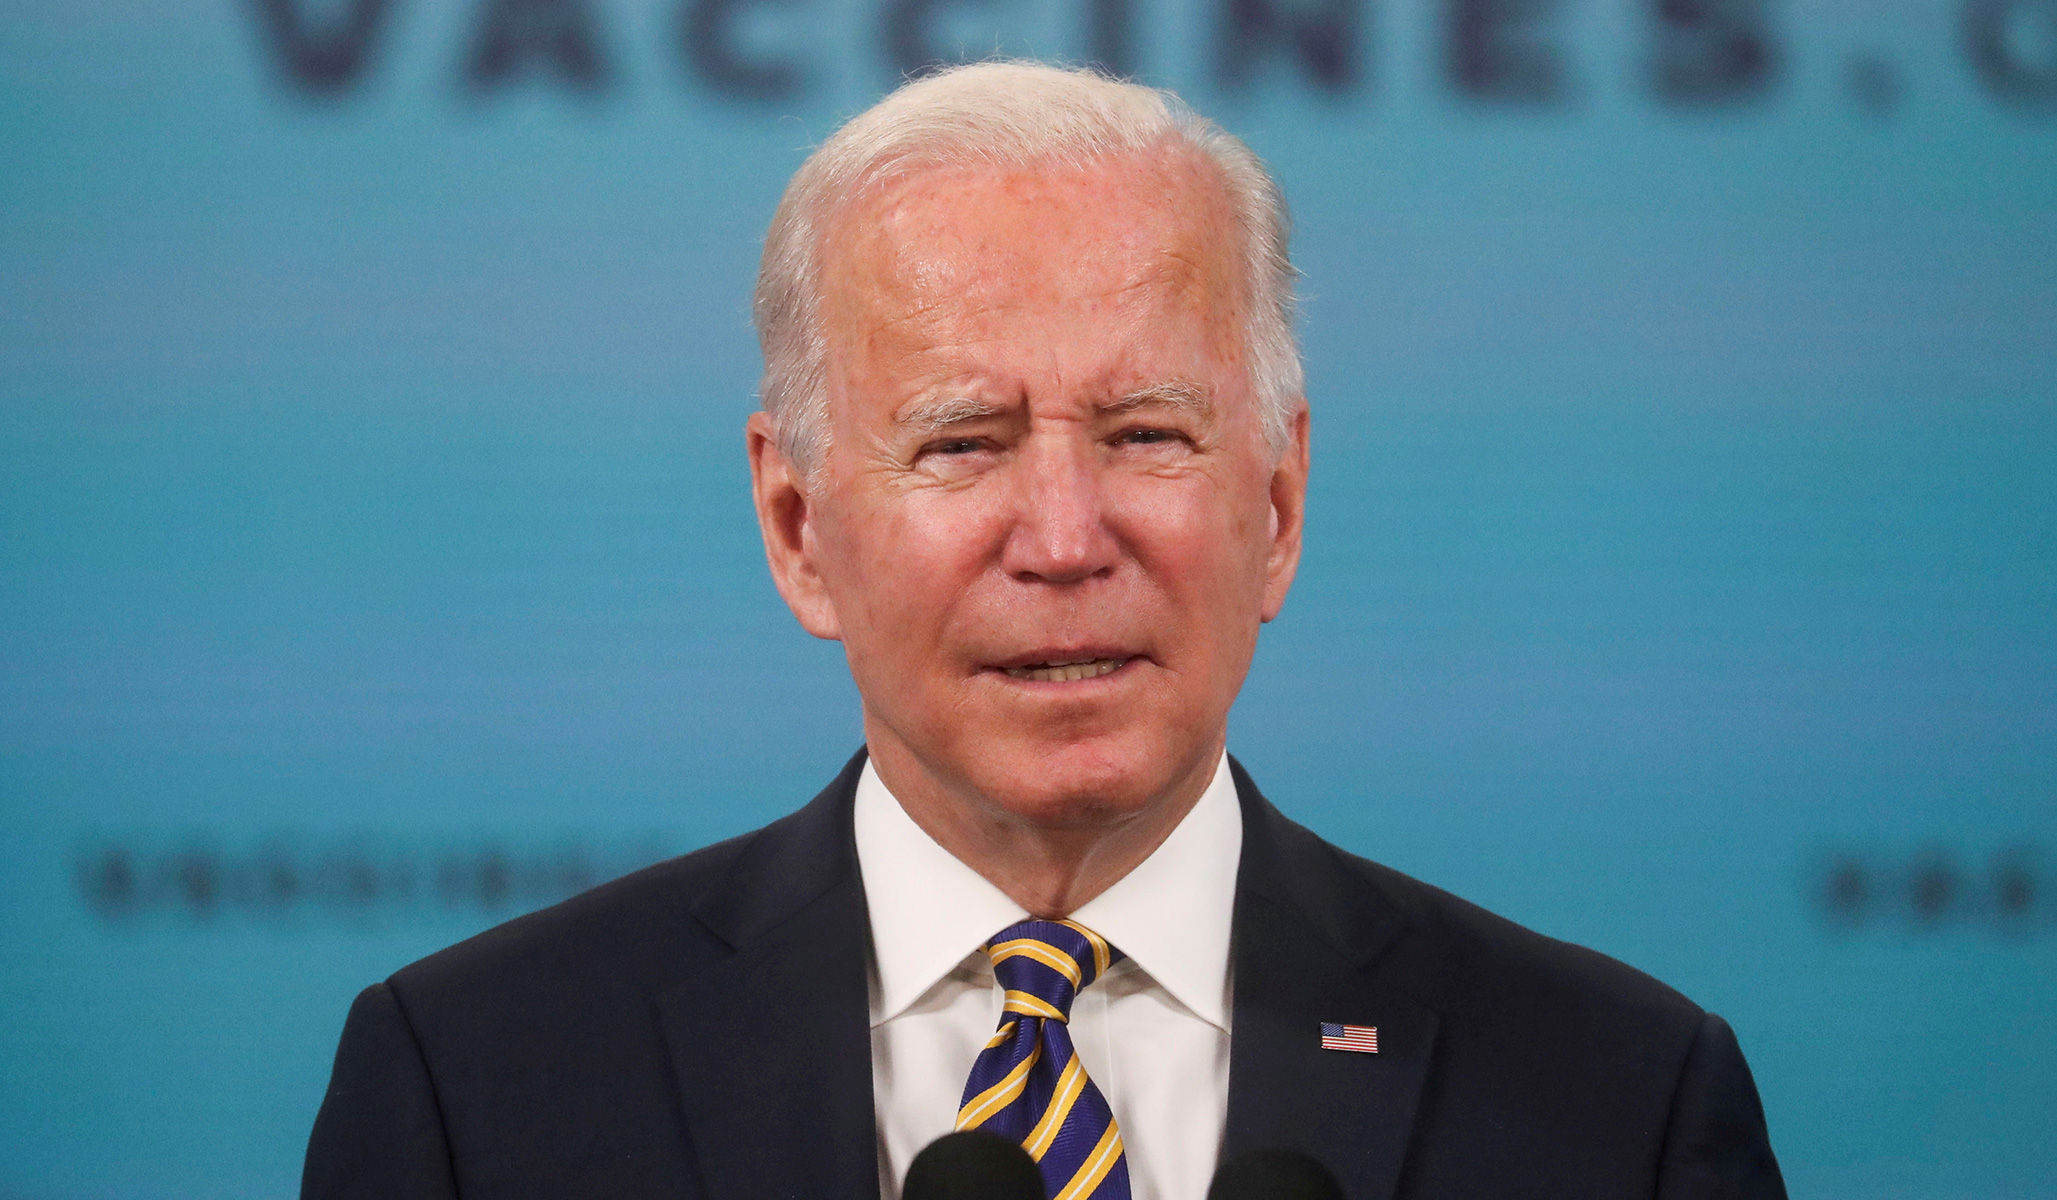 Plurality of Dems Think Replacing Biden Gives Party Better Shot at 2024 Victory